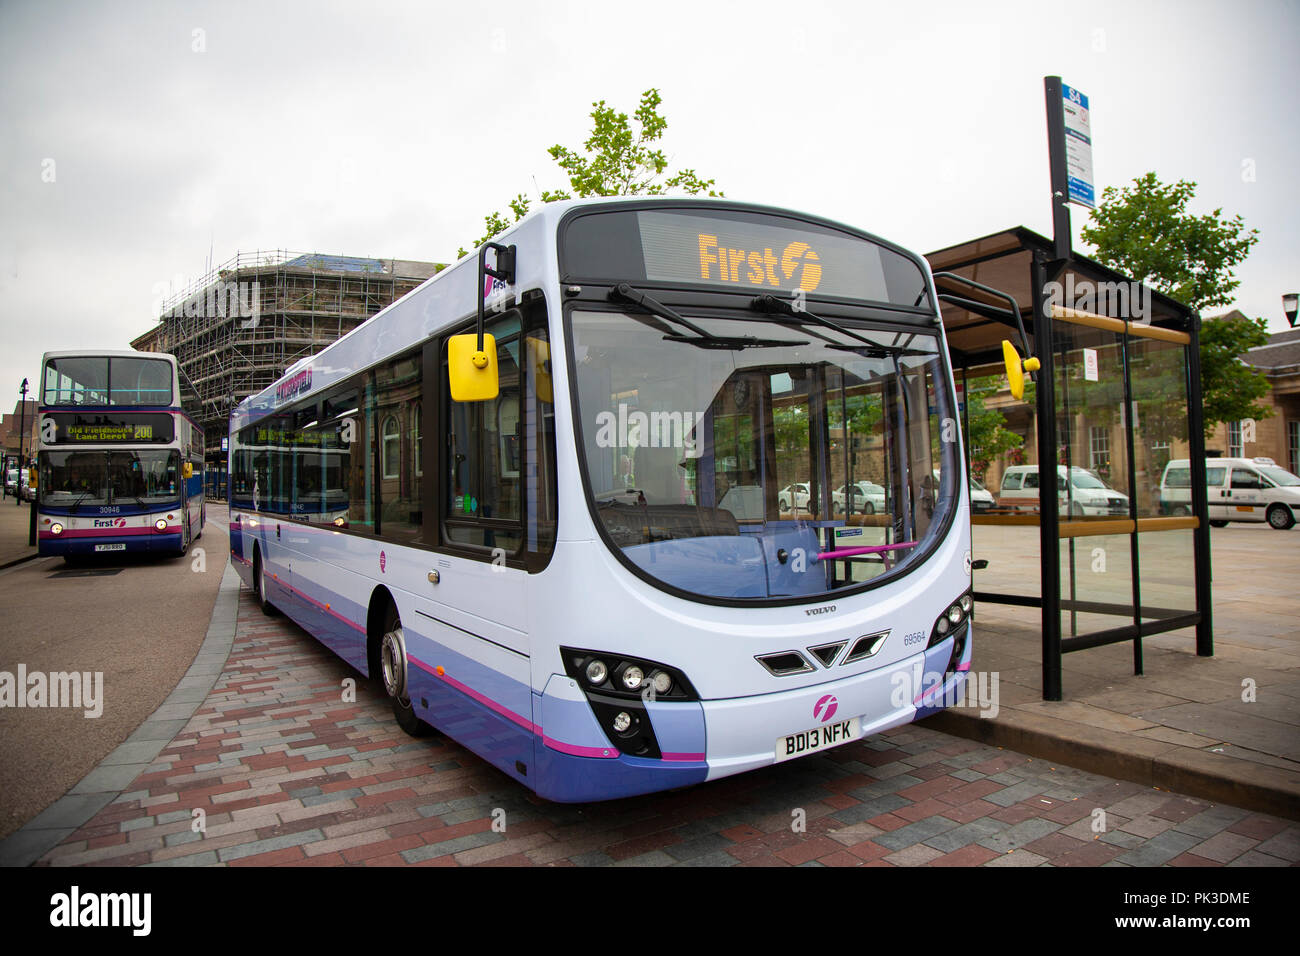 A First Bus Company volvo single decker bus in Huddersfield, West Yorkshire, England Stock Photo